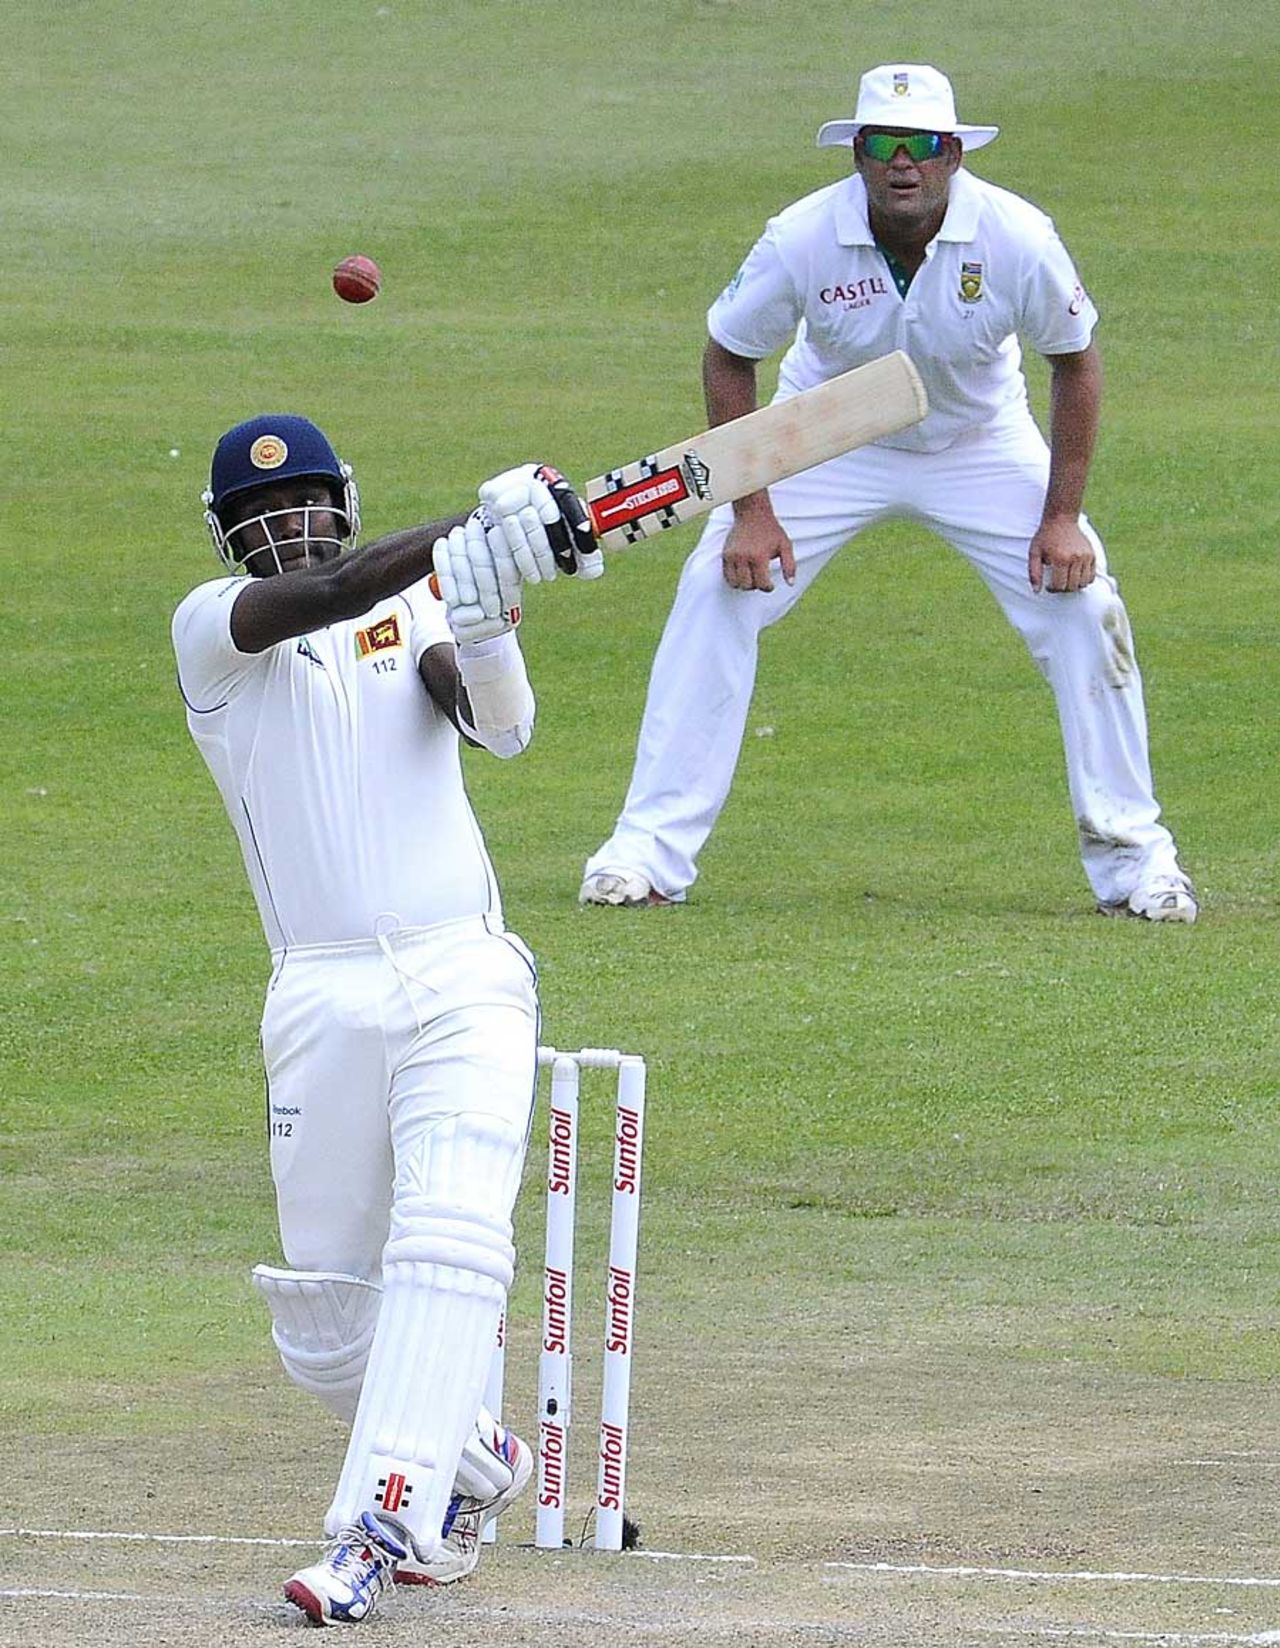 Angelo Mathews' attempt at a pull cost him his wicket, South Africa v Sri Lanka, 2nd Test, Durban, 3rd day, December 28, 2011